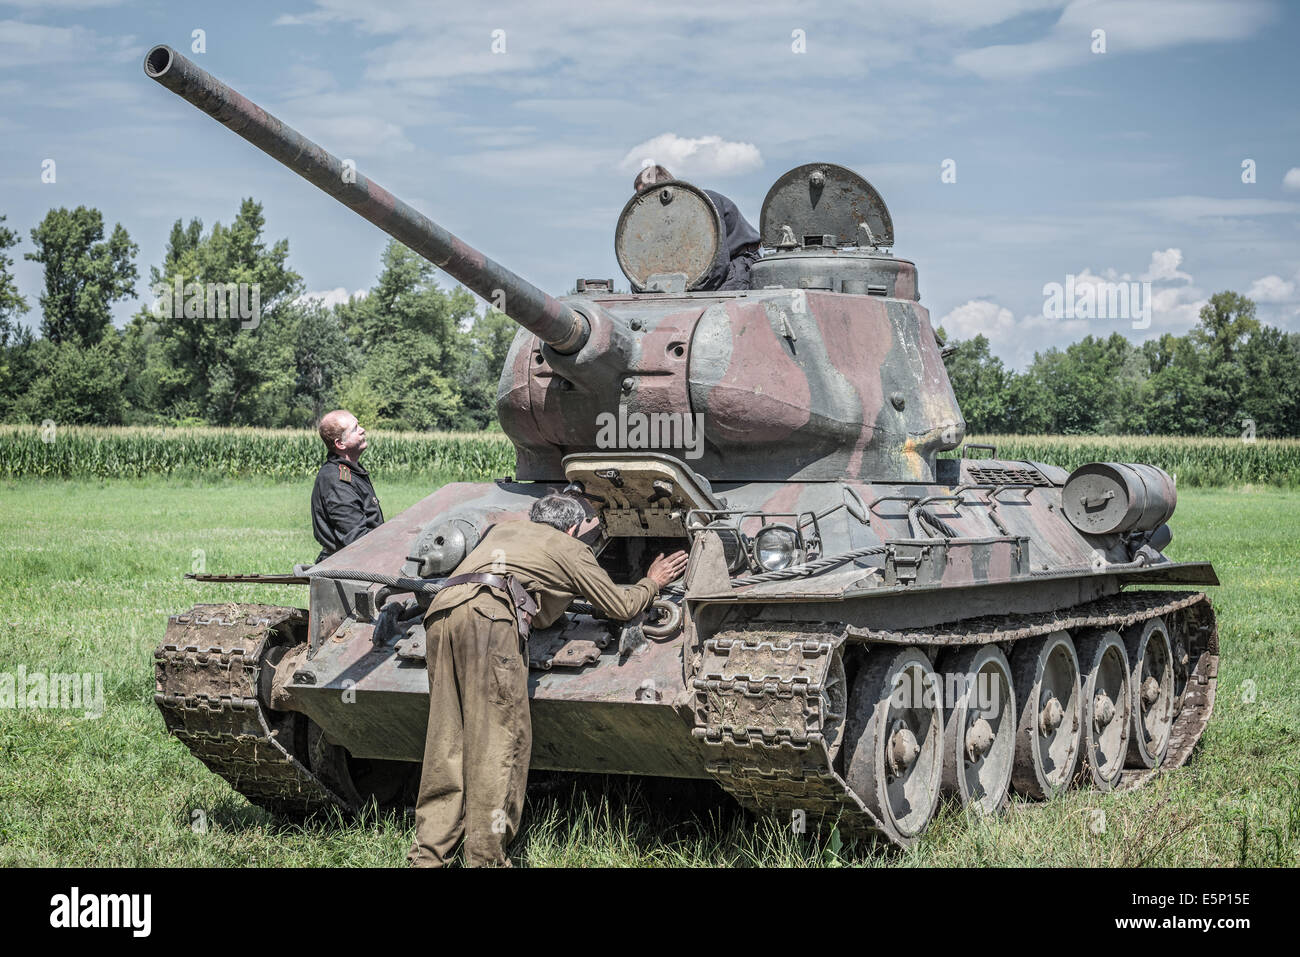 Russian soldiers checking a tank before attacking german positions during reenactment of World War II fights in Slovakia Stock Photo